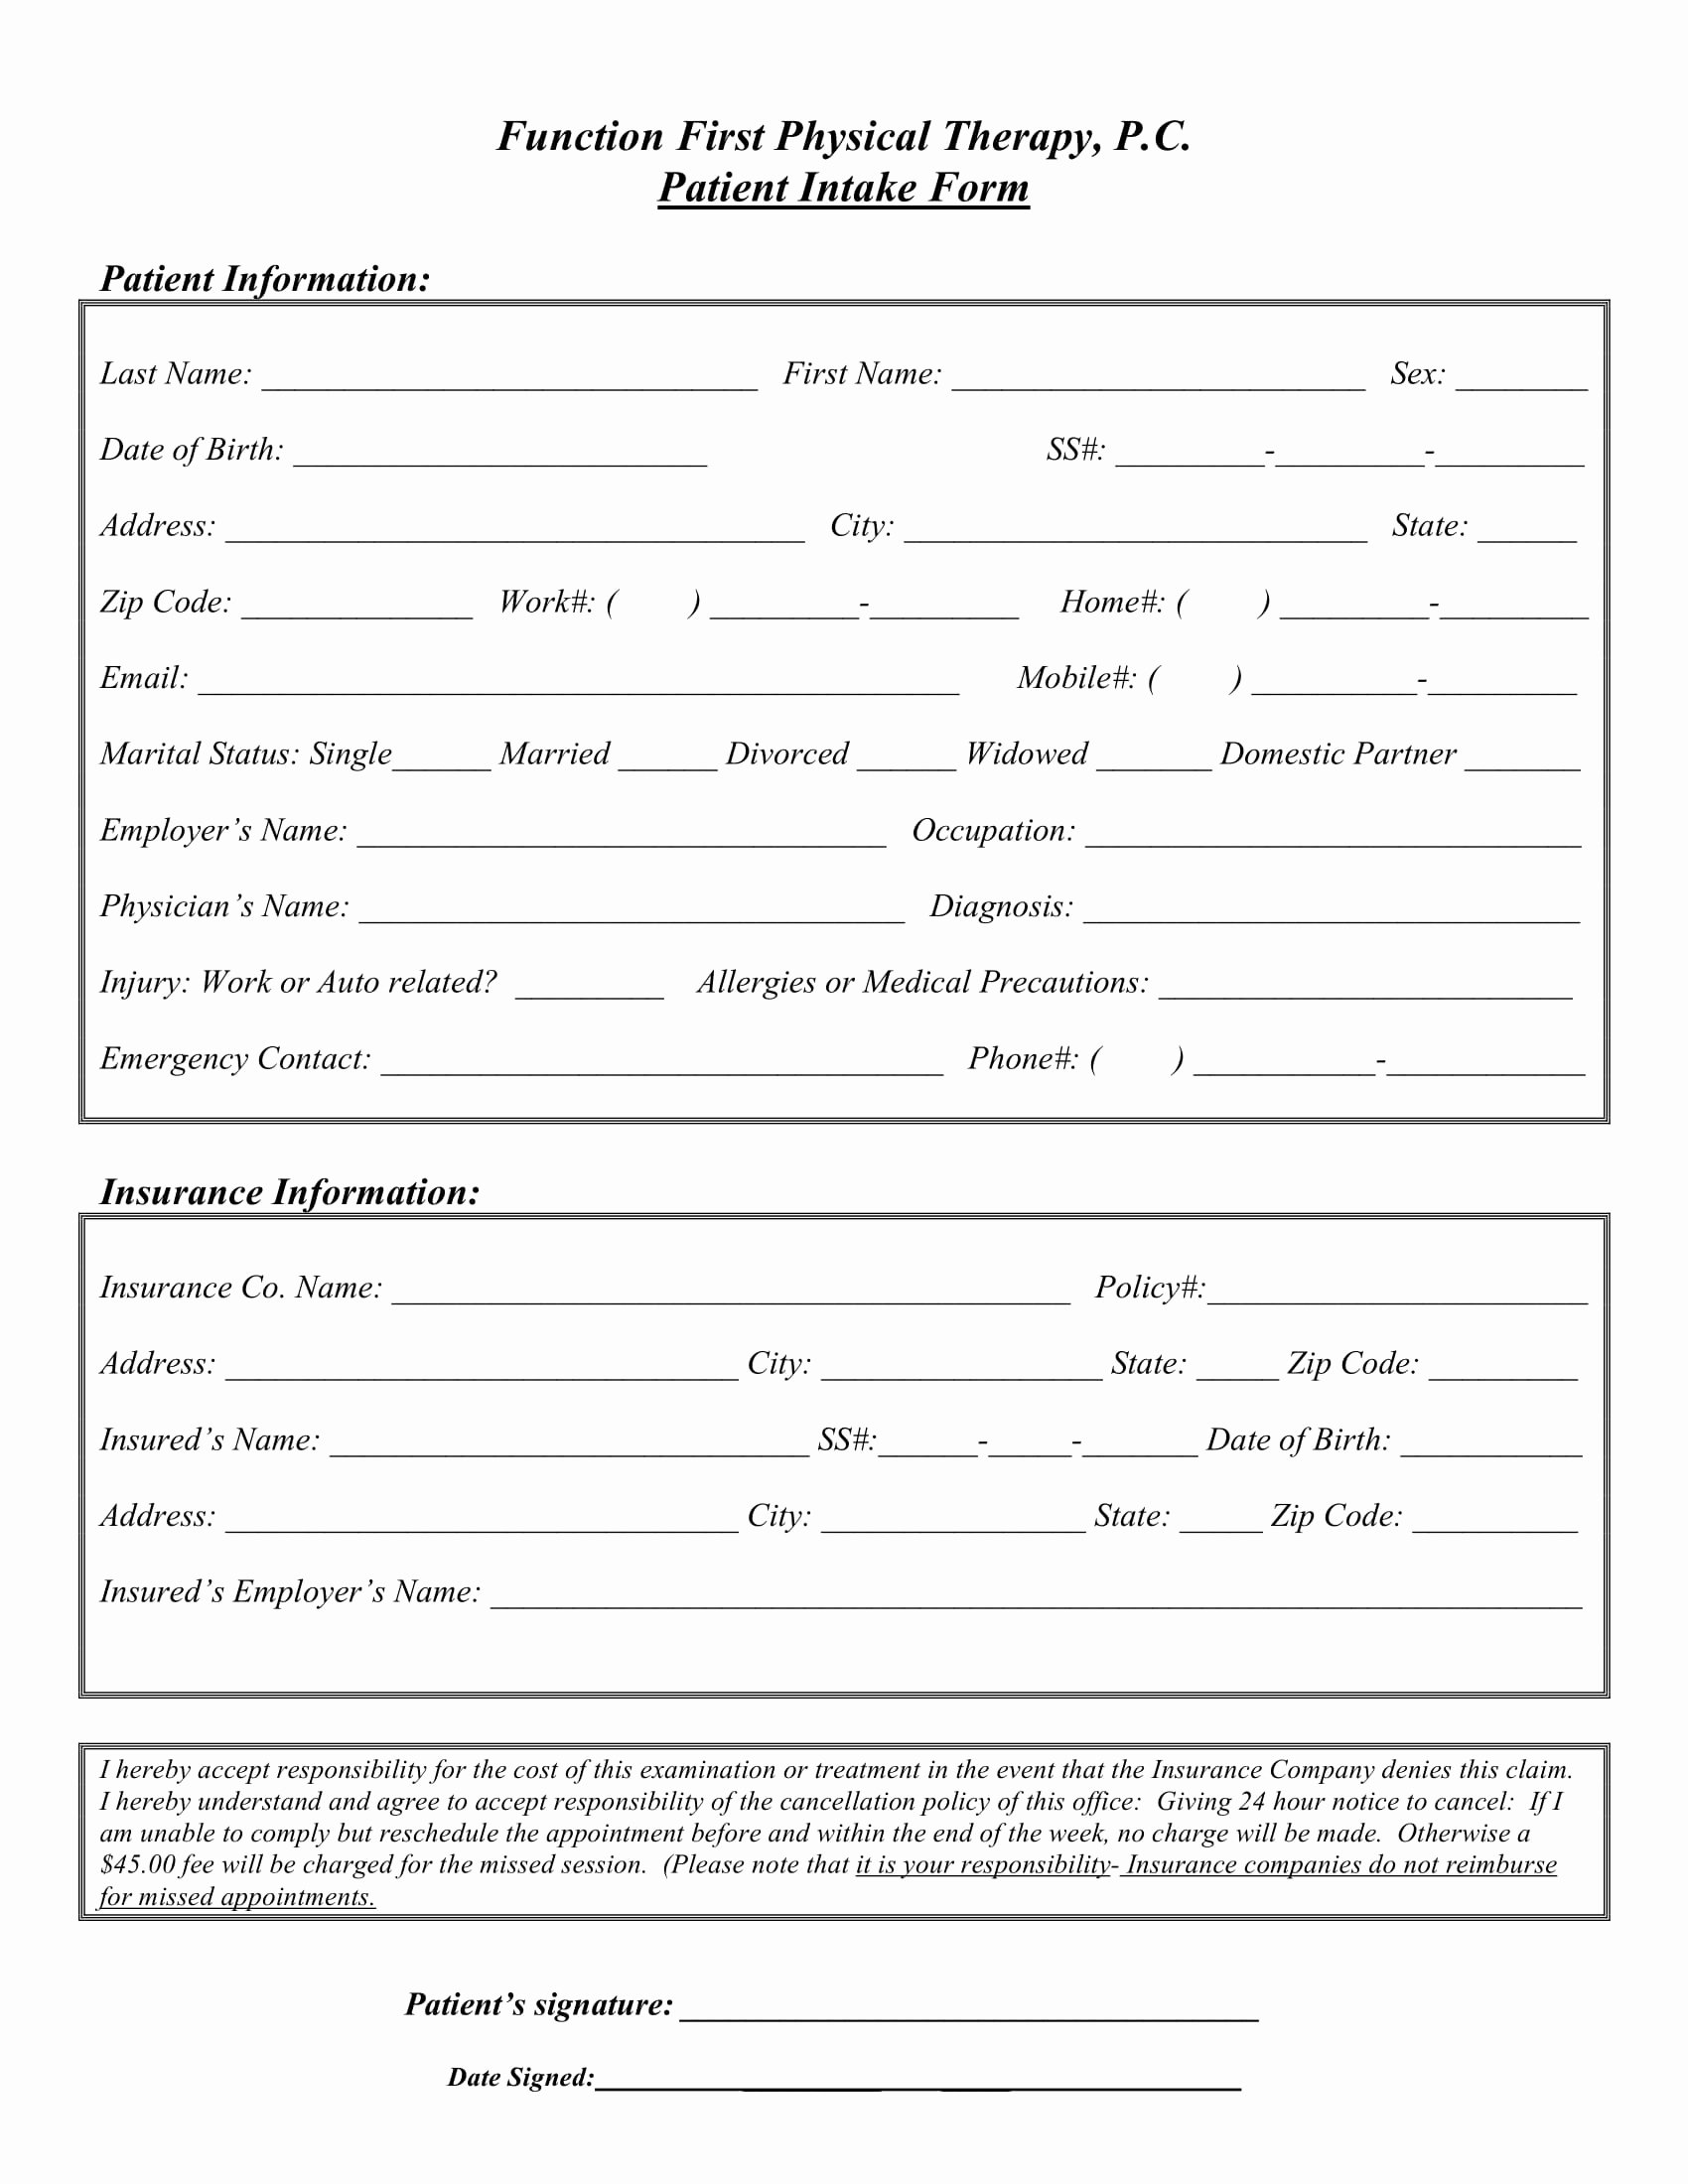 patient intake form template excel